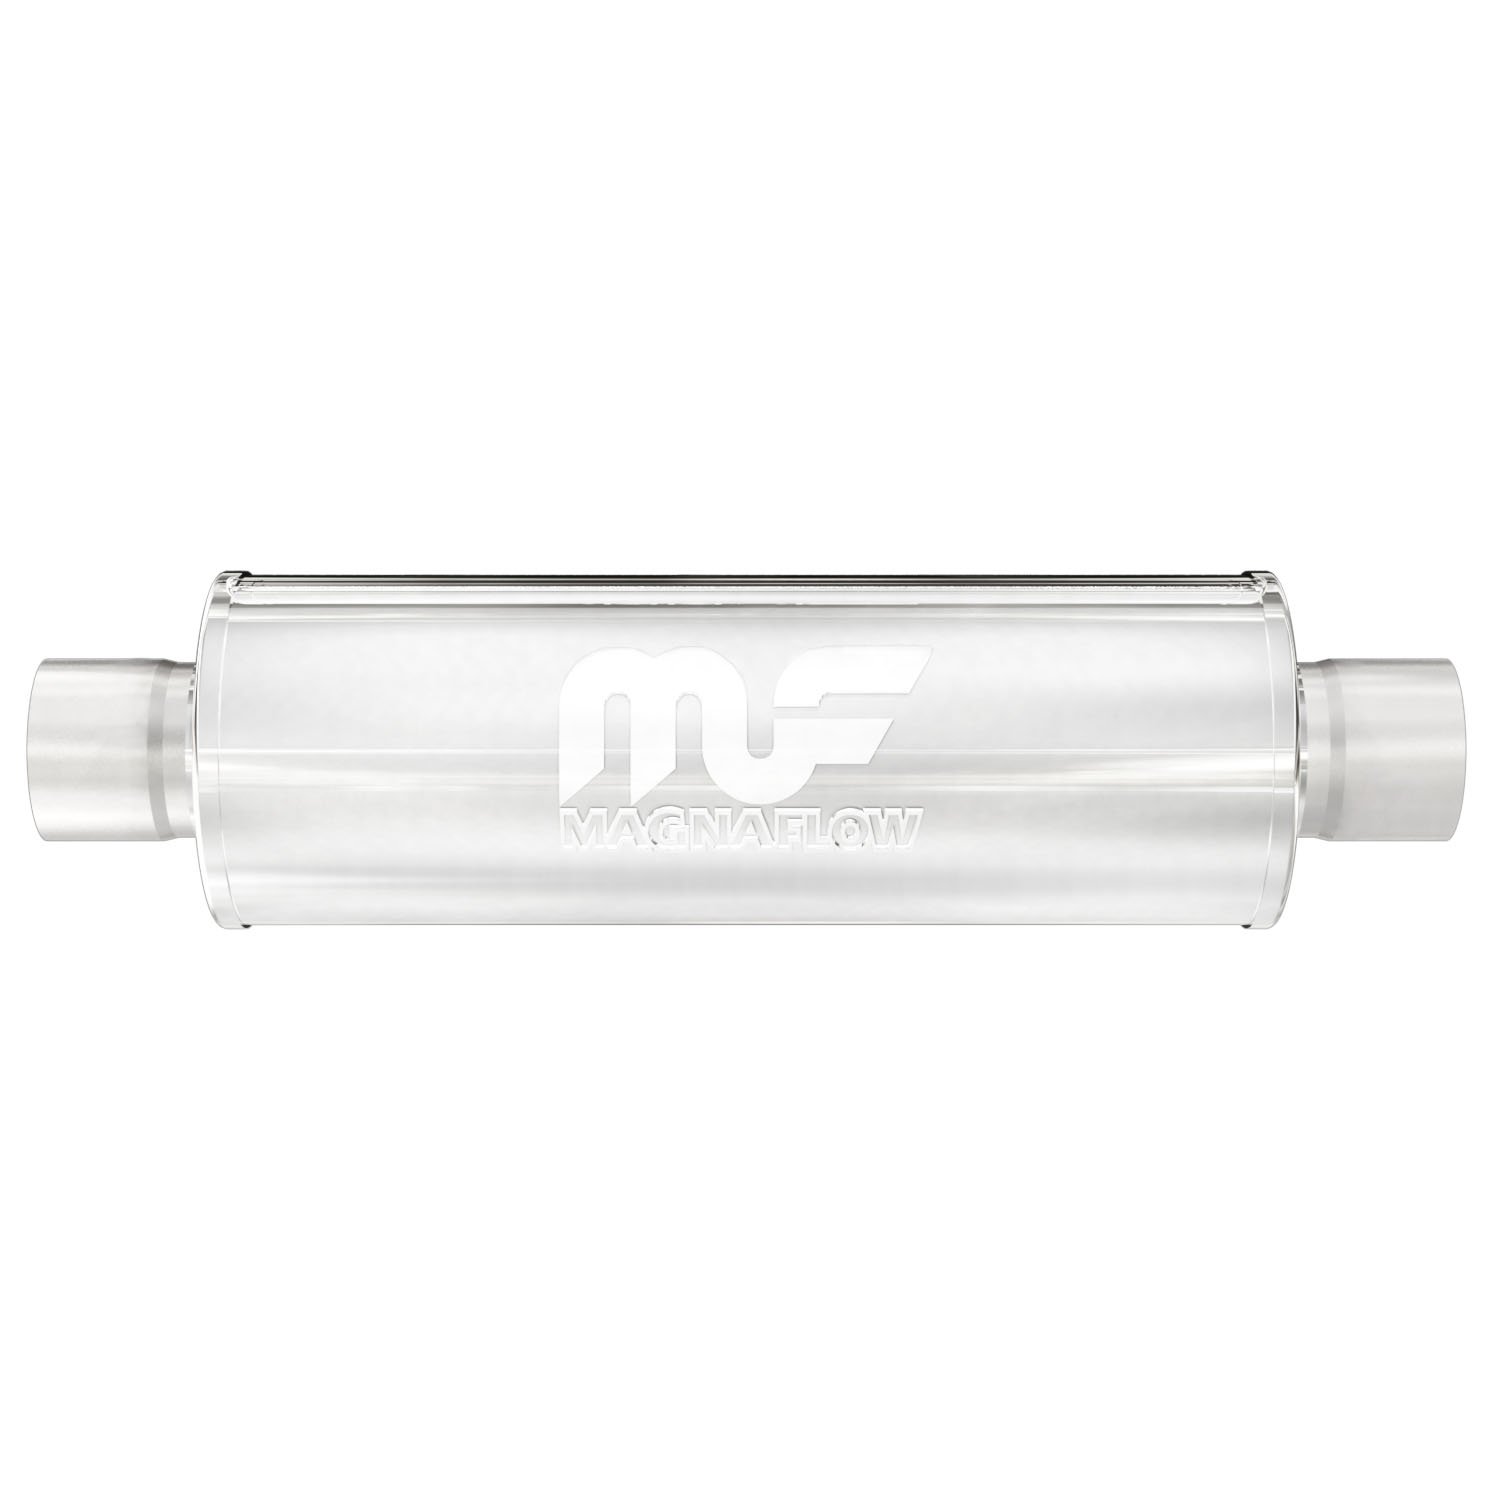 7" Round Muffler, Center In/Center Out: 2.5", Body Length: 14", Overall Length: 20", Core Size: 2.5" [Brushed Finish]